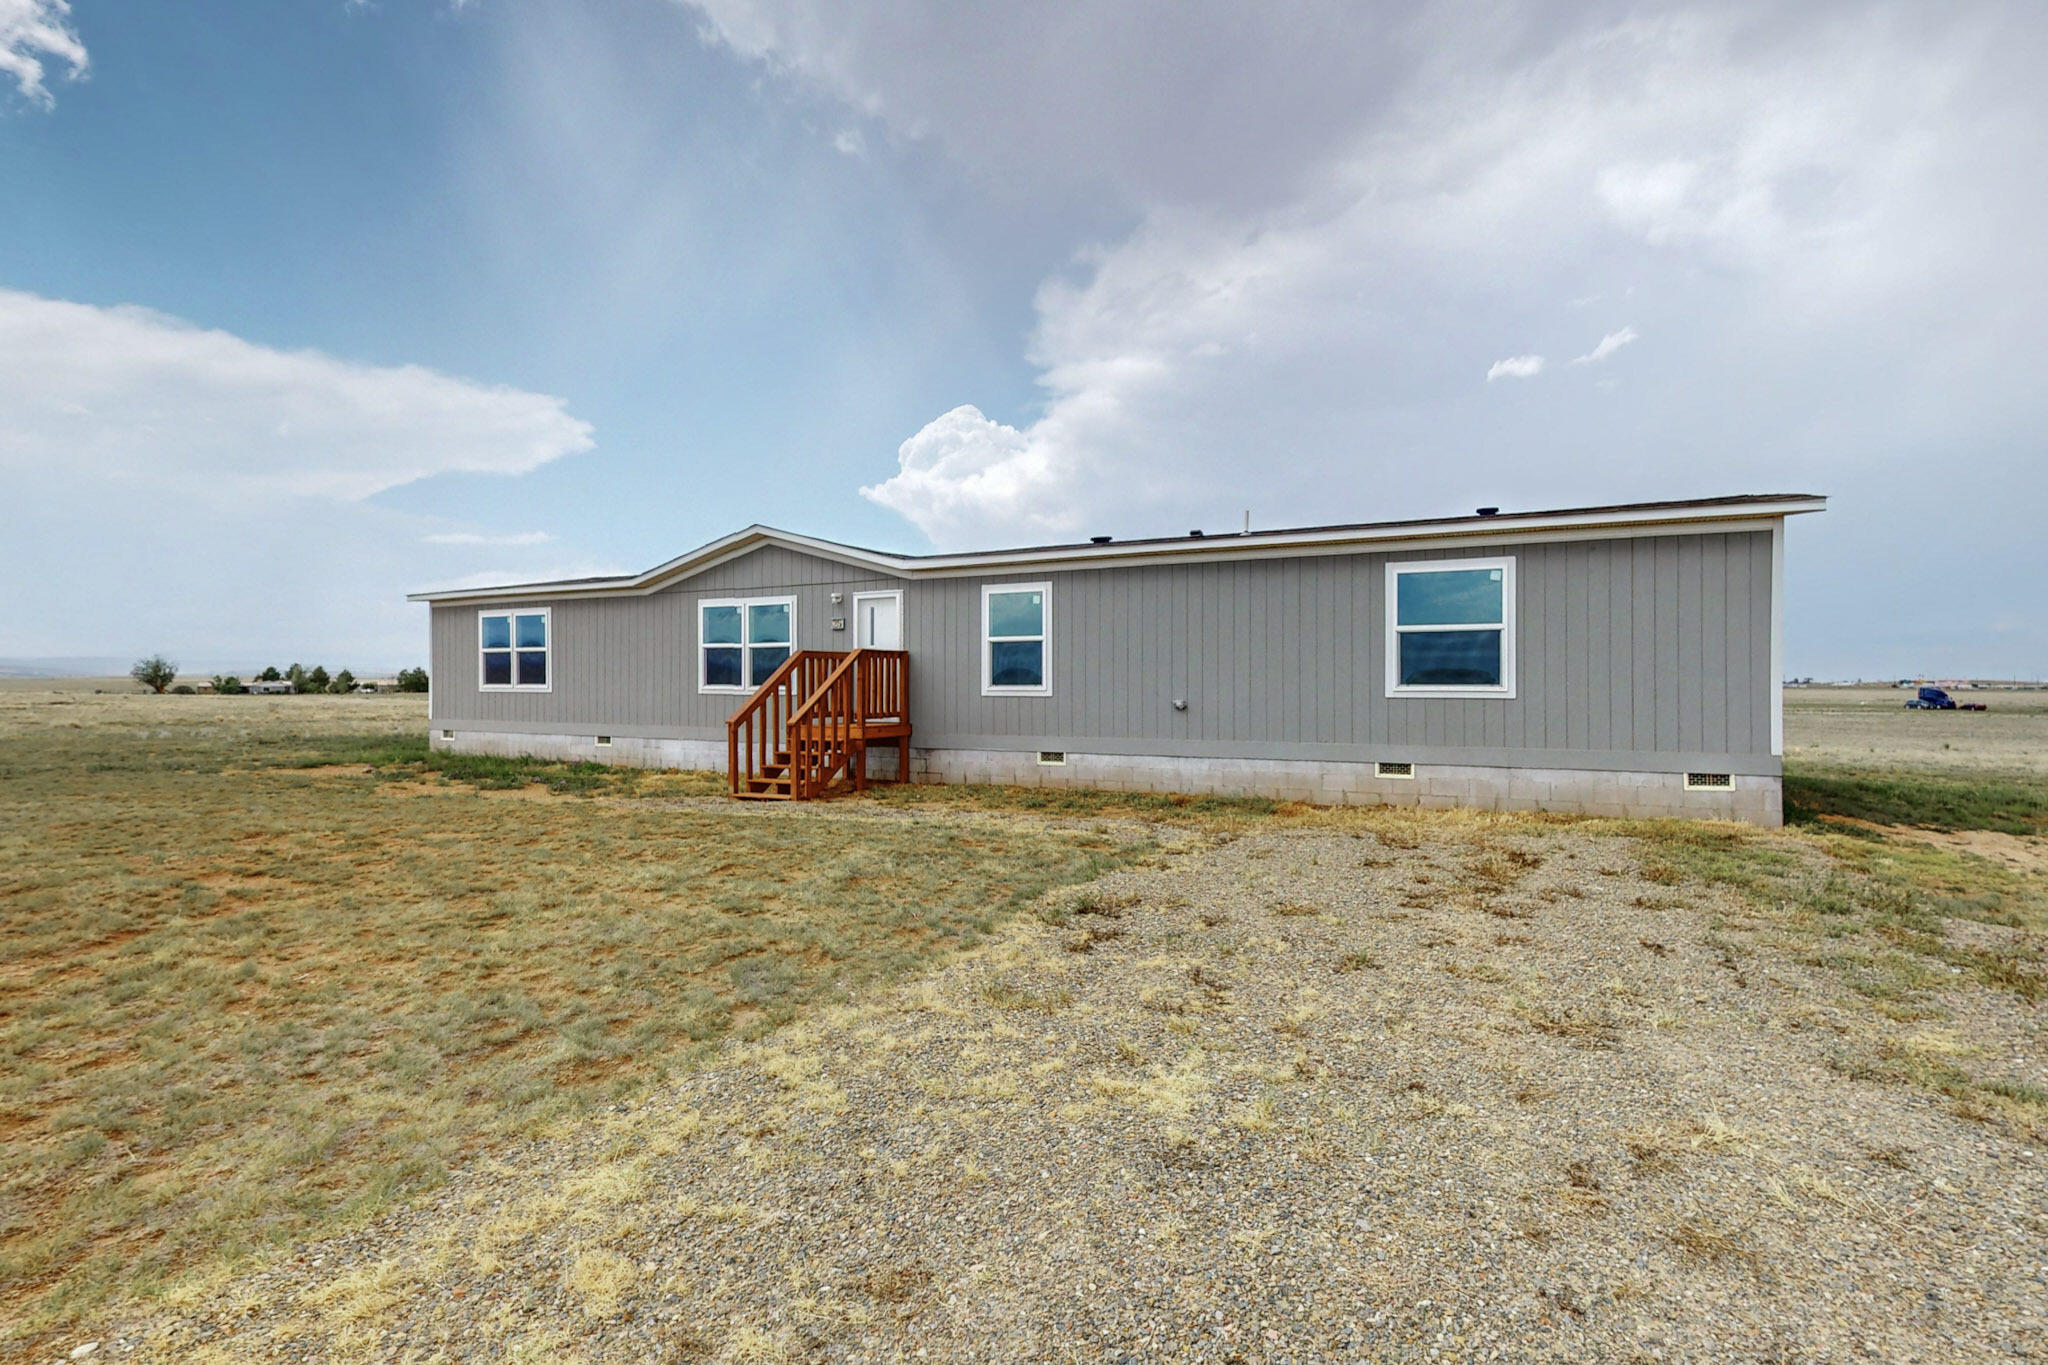 23 Scarlet Ohara, Moriarty, New Mexico 87035, 4 Bedrooms Bedrooms, ,2 BathroomsBathrooms,Residential,For Sale,23 Scarlet Ohara,1054680